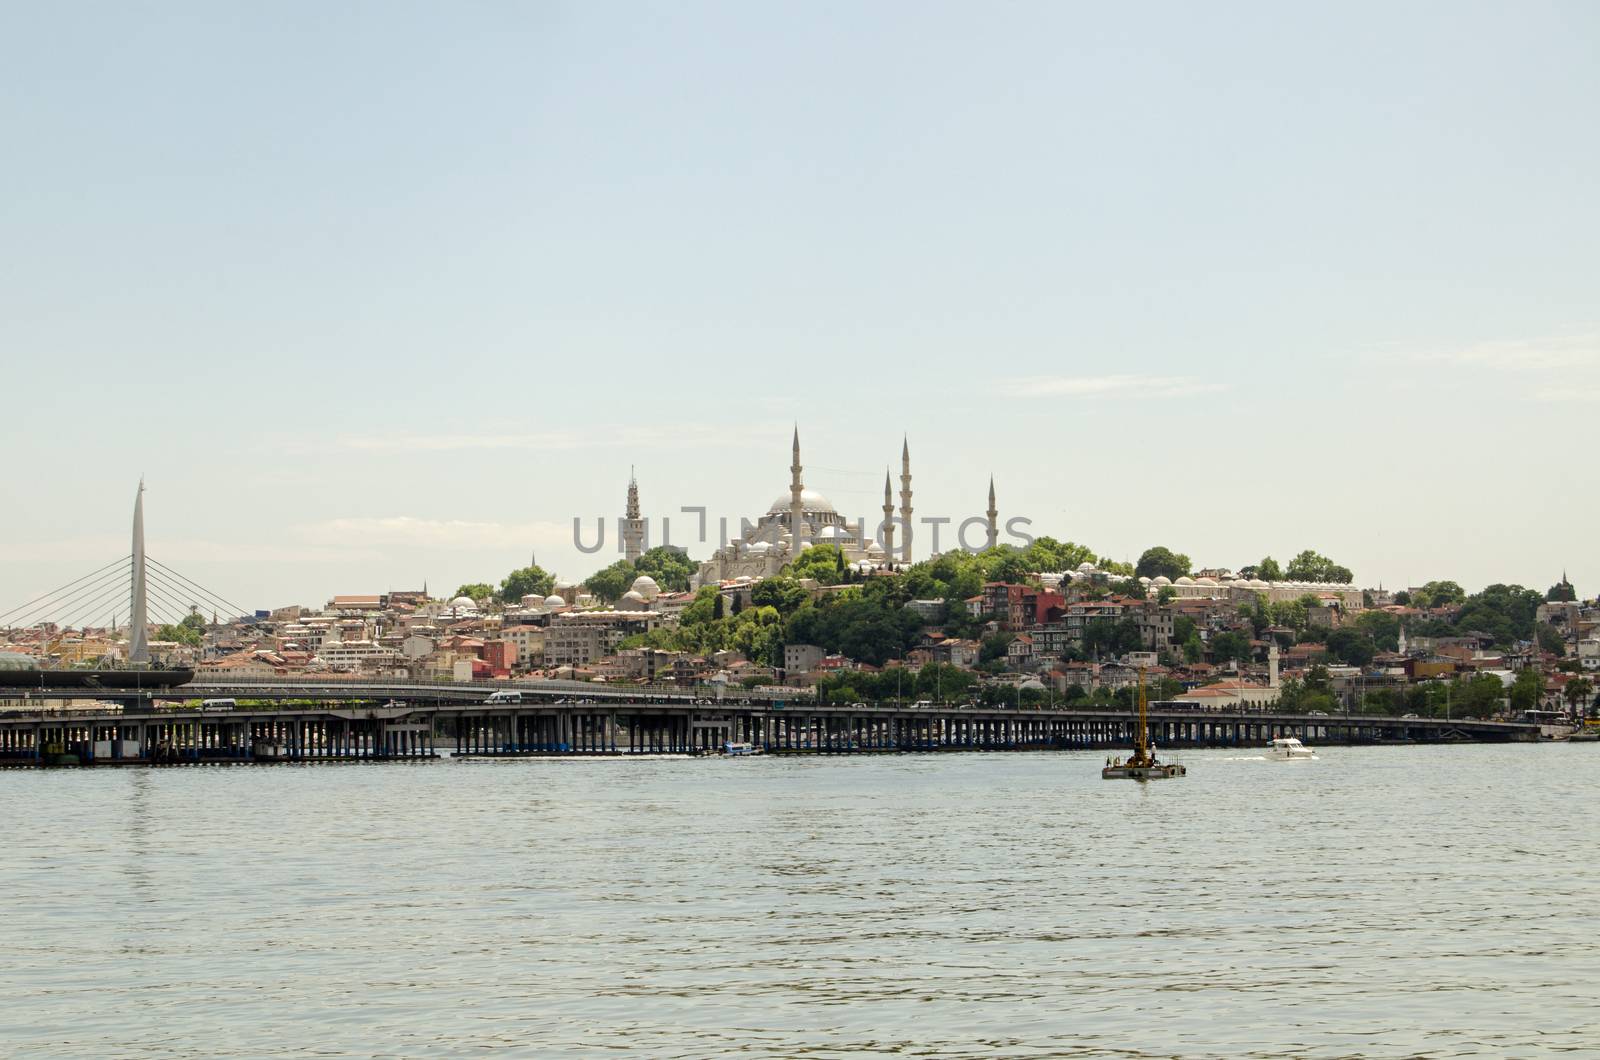 The magnificent Suleymaniye Mosque overlooking the Golden Horn with the new Halic Metro bridge in the foreground on a sunny Sunday afternoon in Istanbul, Turkey.